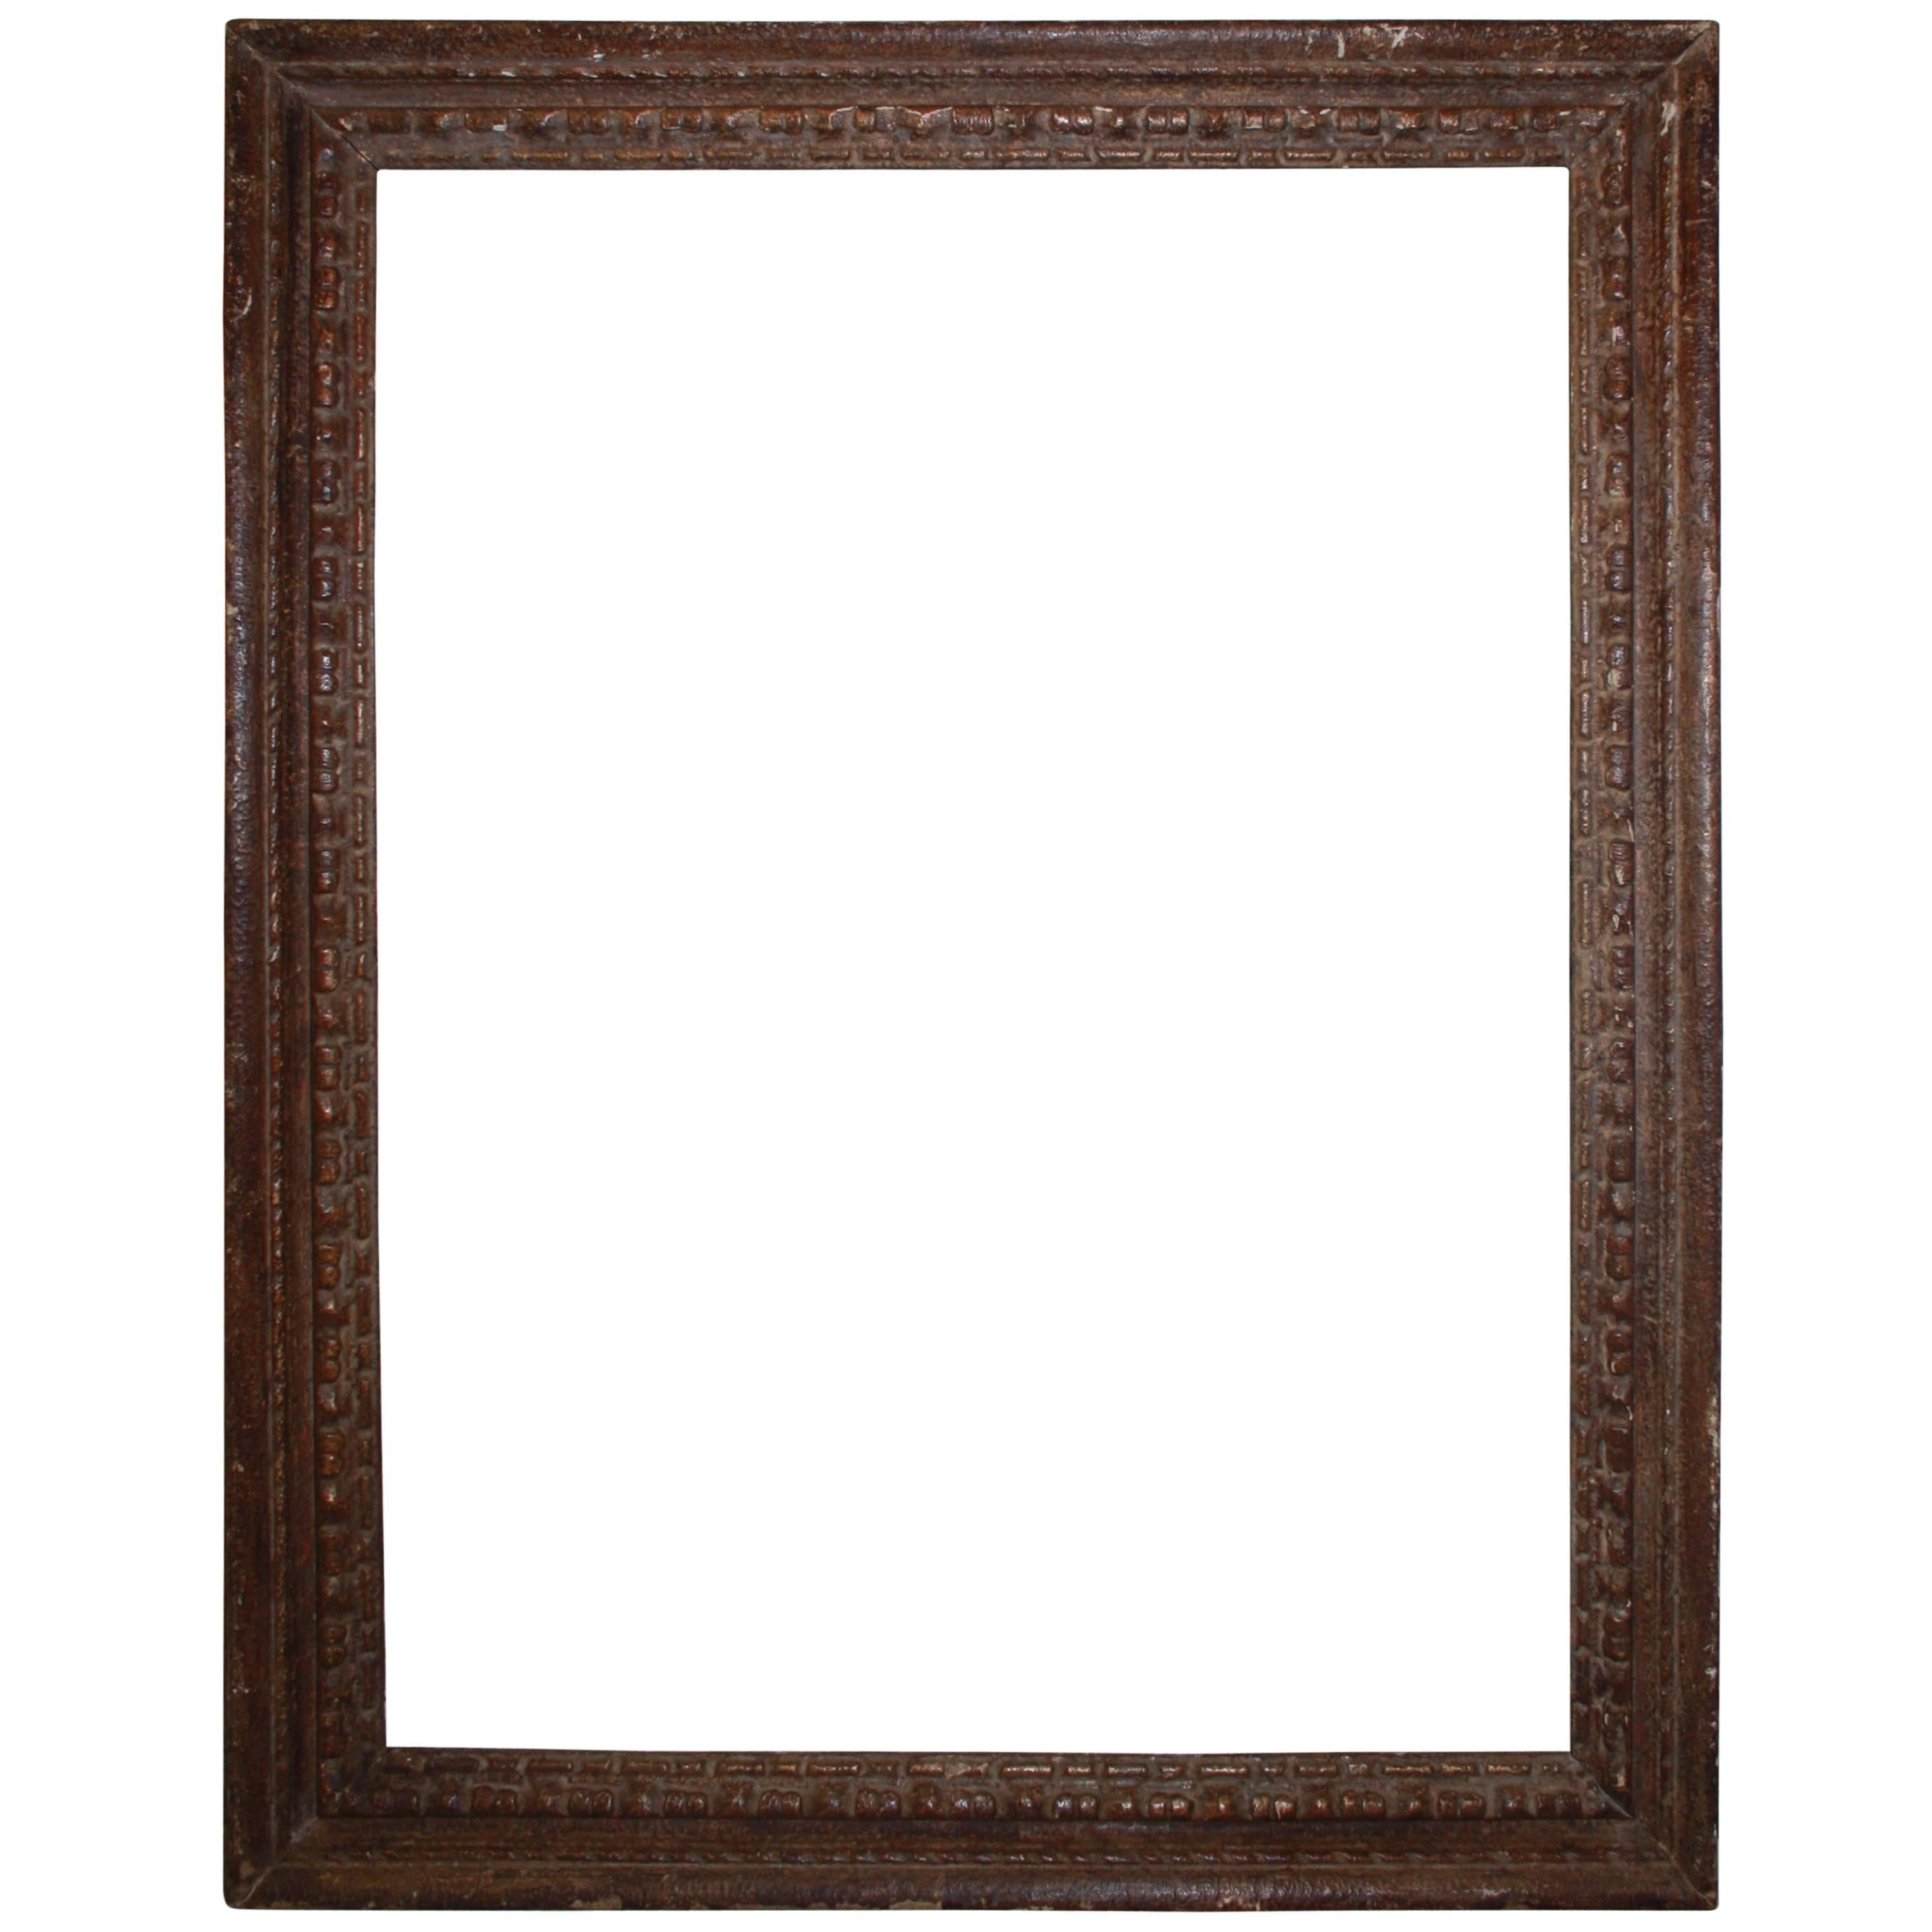 Early 19th Century French Frame